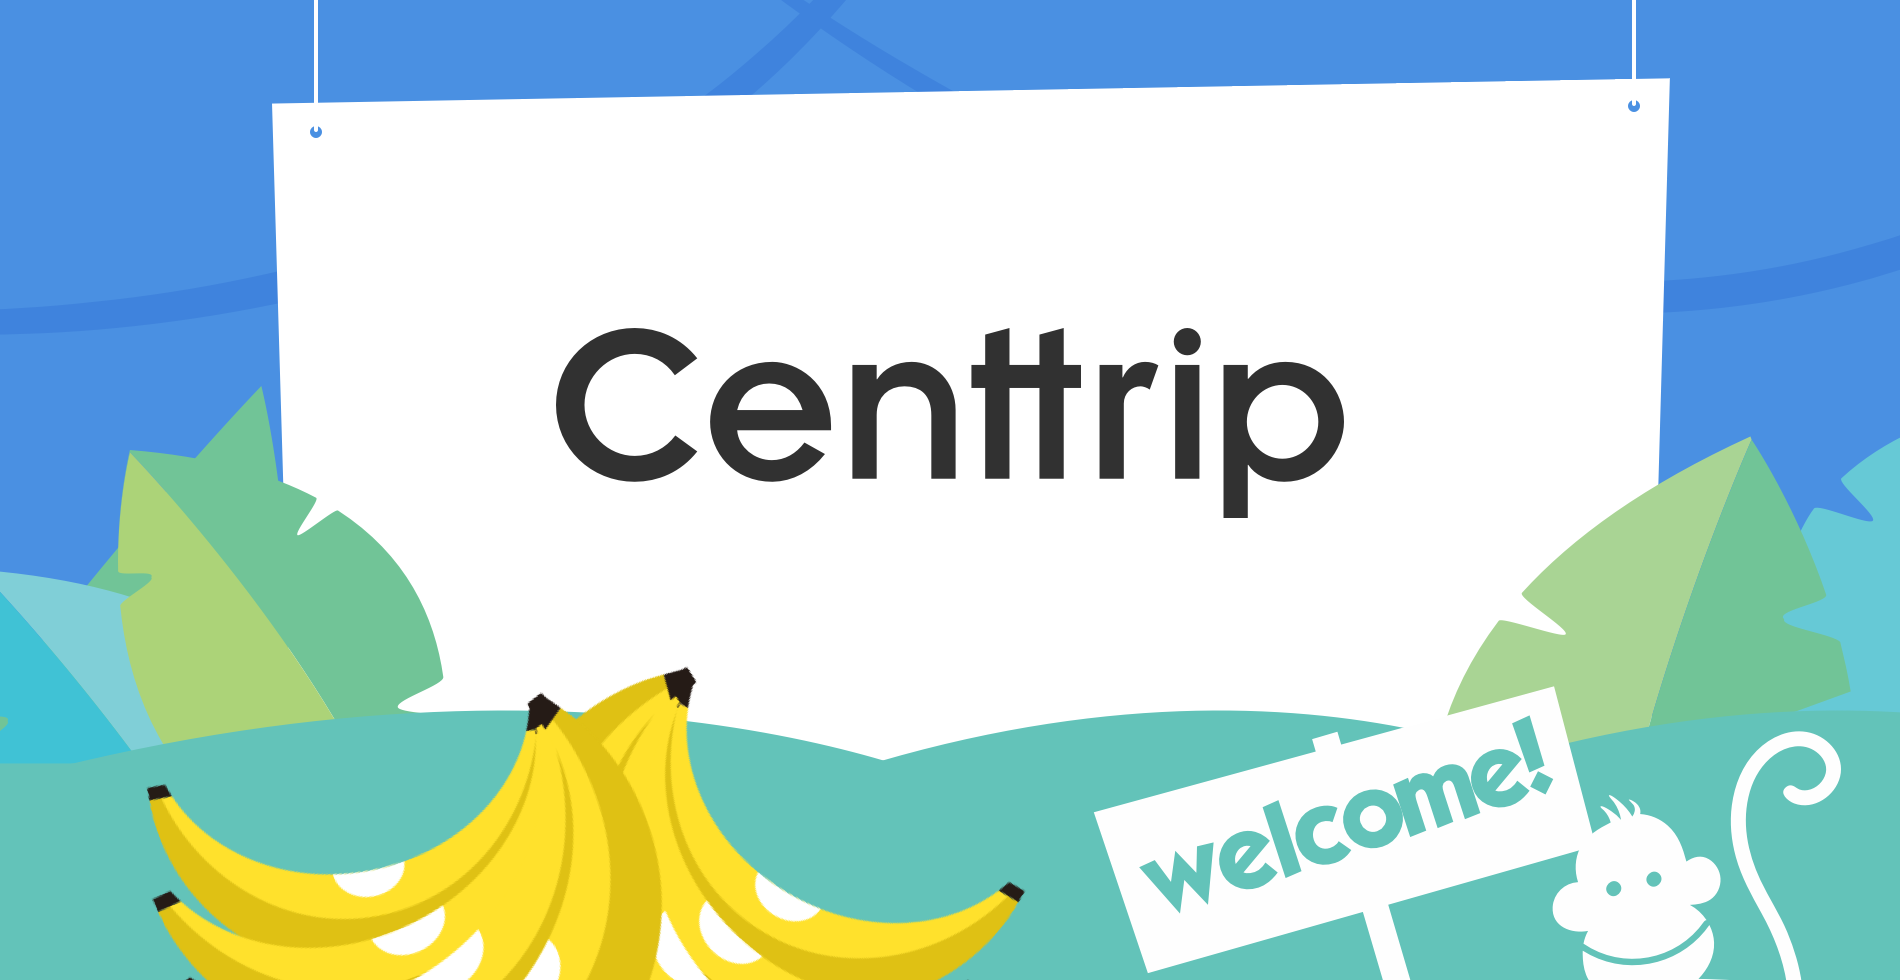 Welcome to Centtrip!